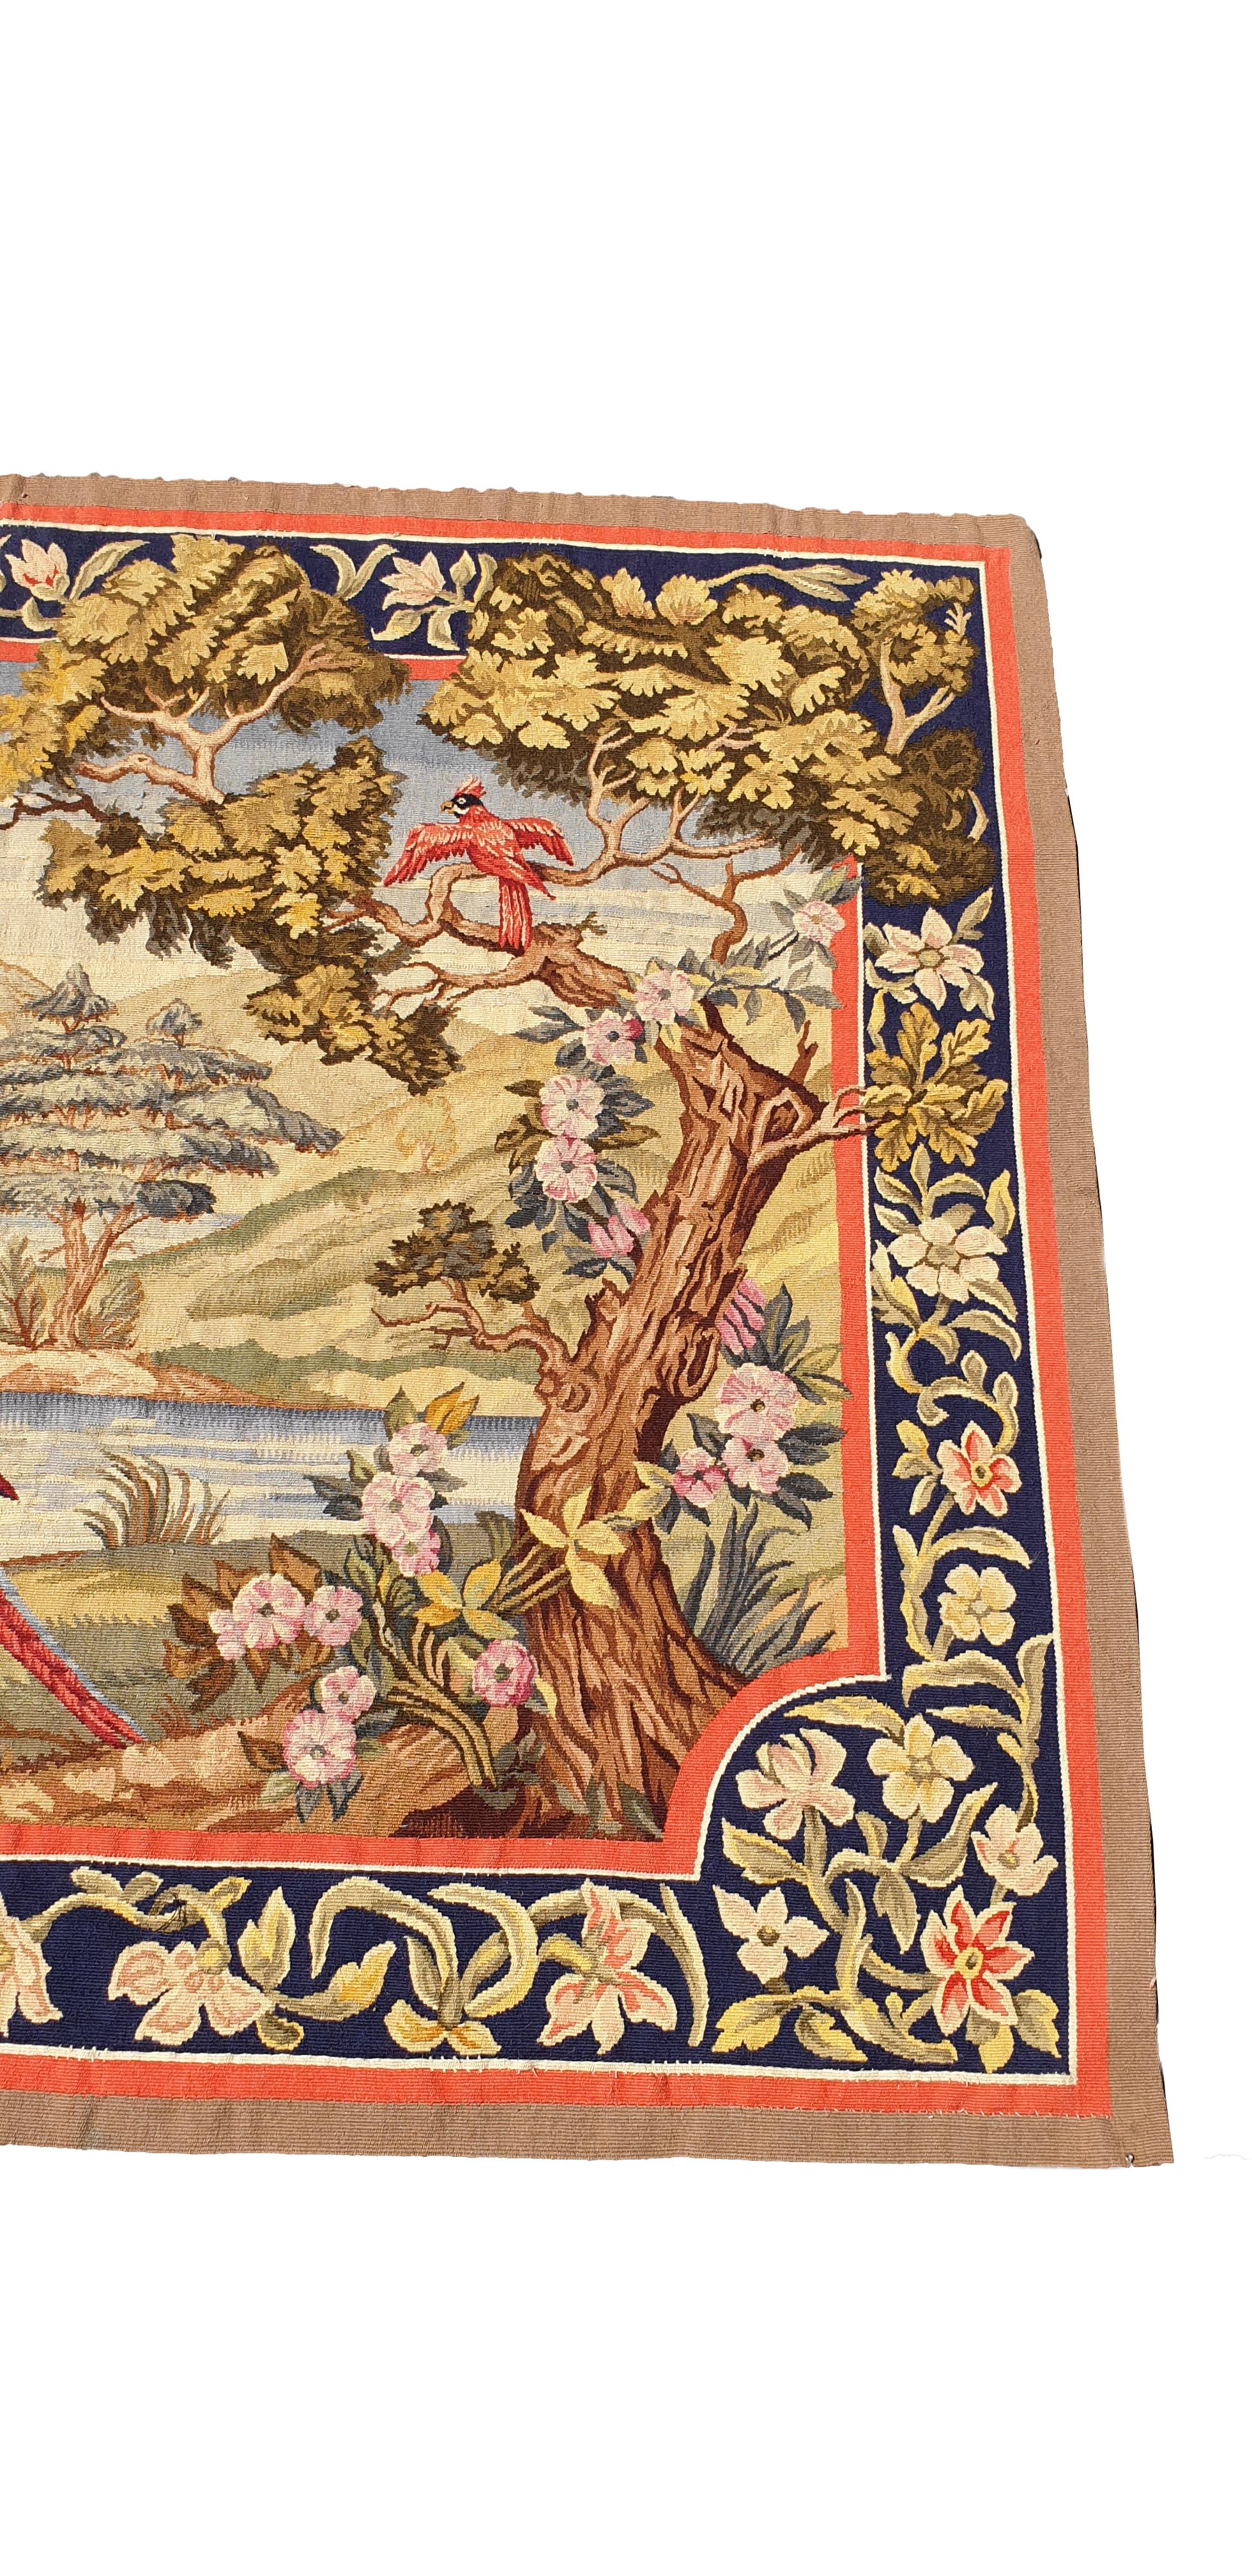 Romantic Aubusson French Antique Tapestry, 19th Century